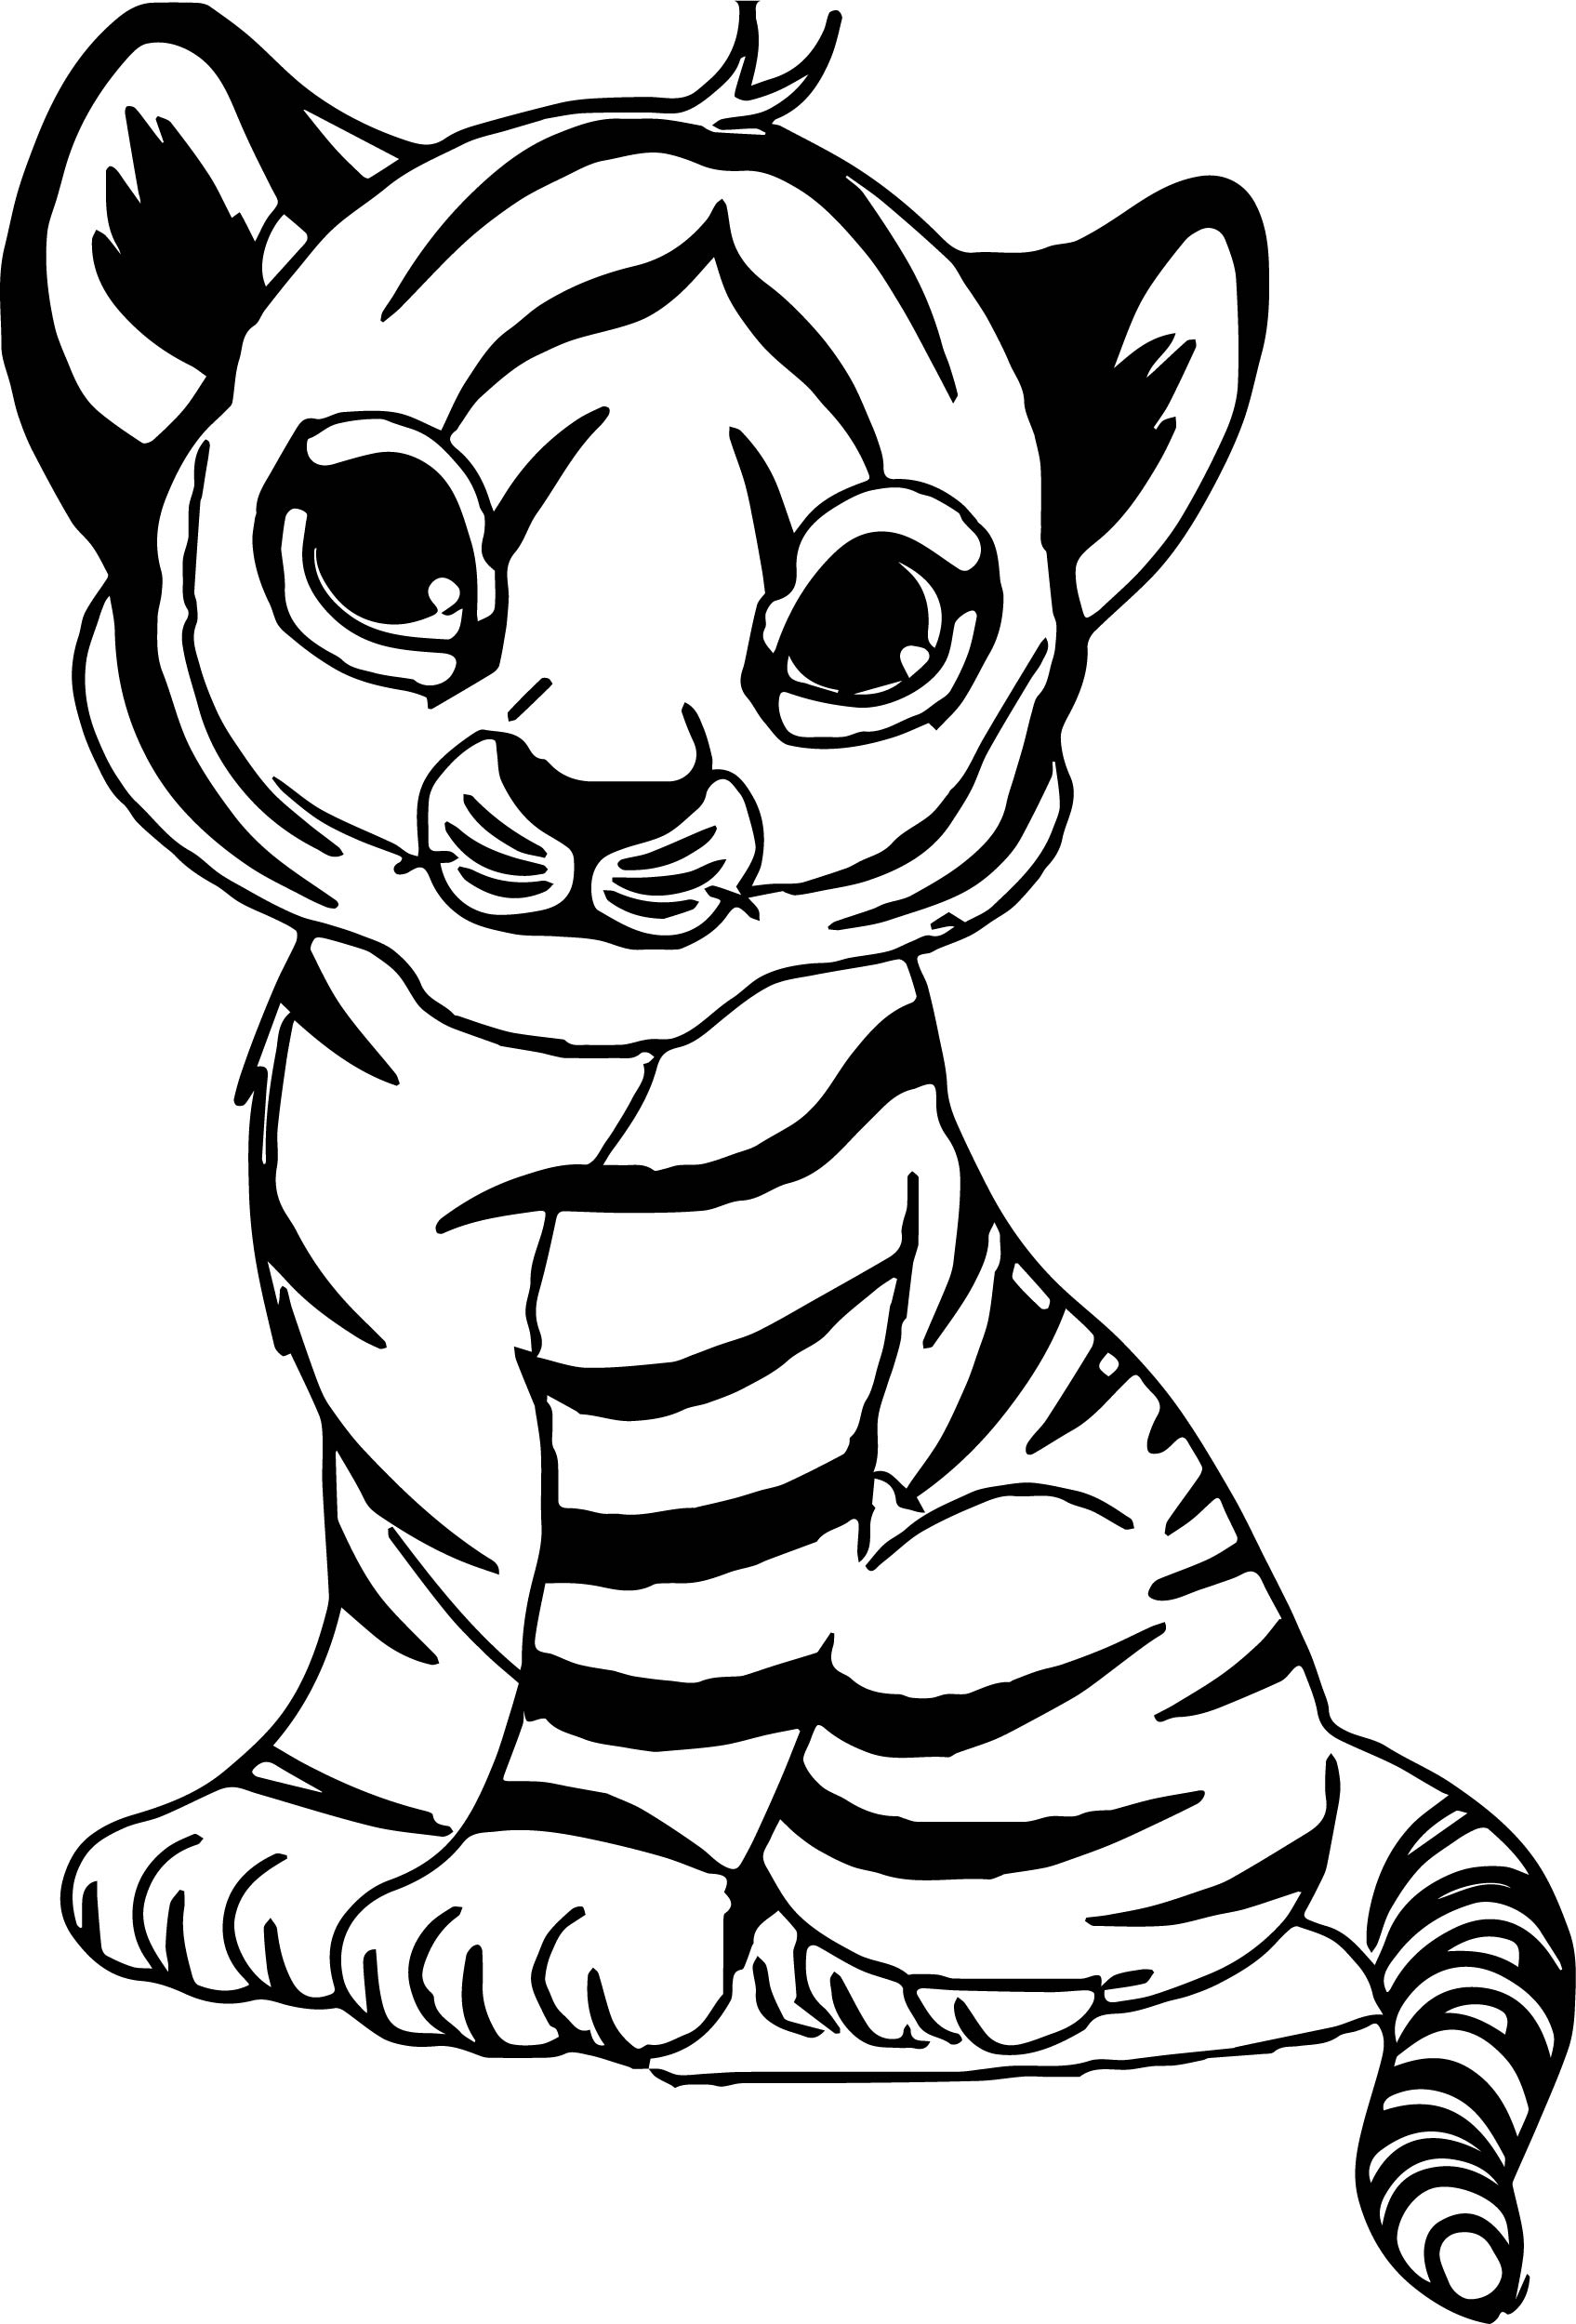 Download The Cutest Baby Tiger Coloring Page - Free Printable ...